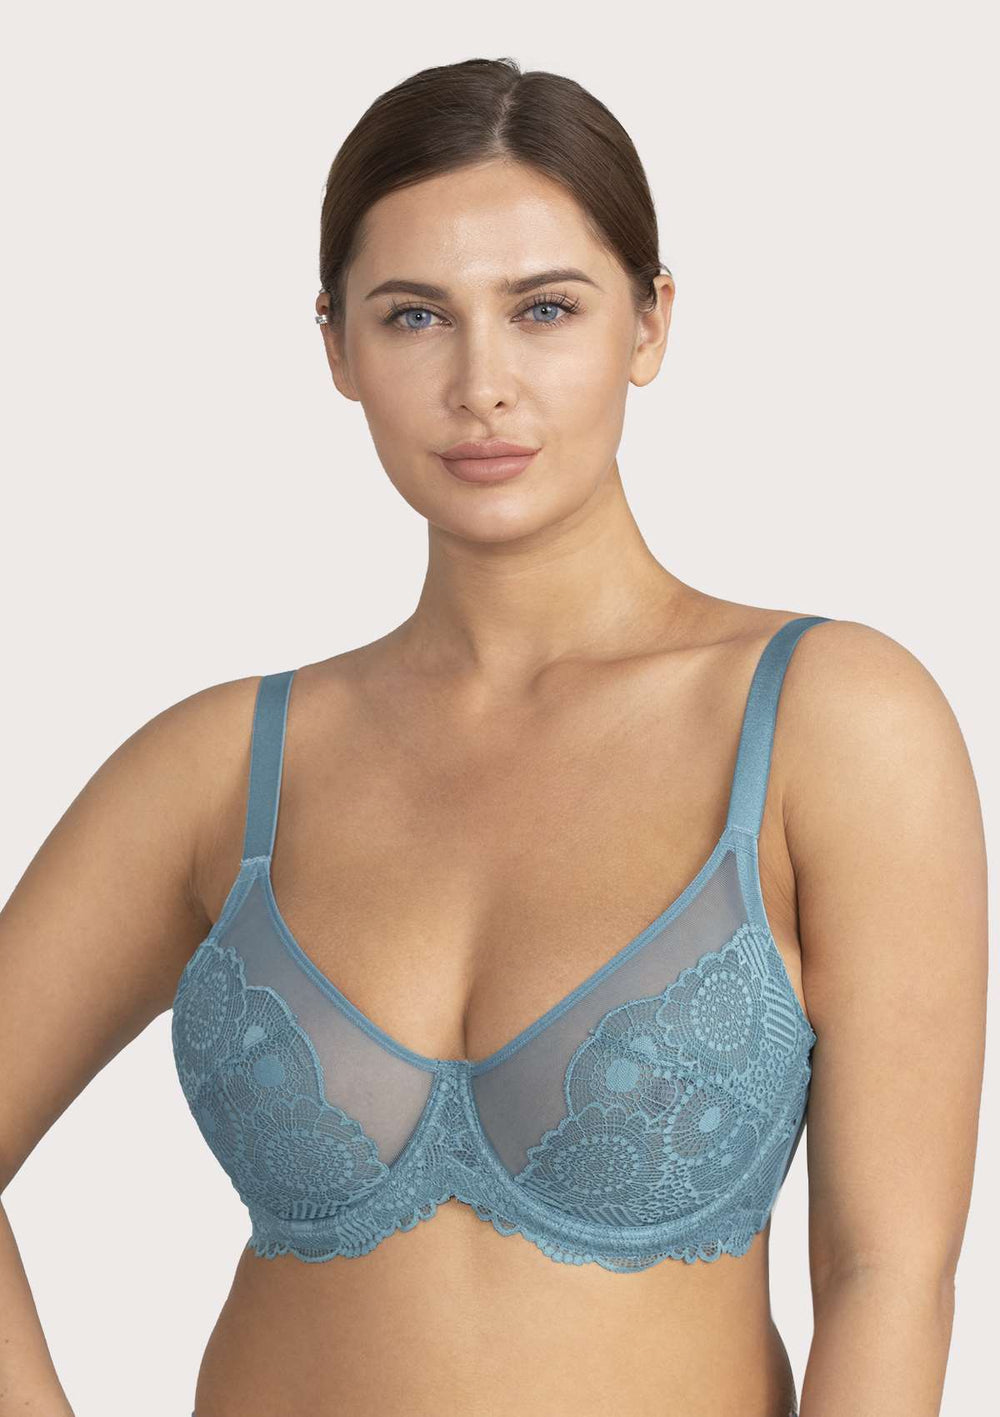 Women's Sexy Sheer Mesh See Through Bra Non Padded Unlined Lace